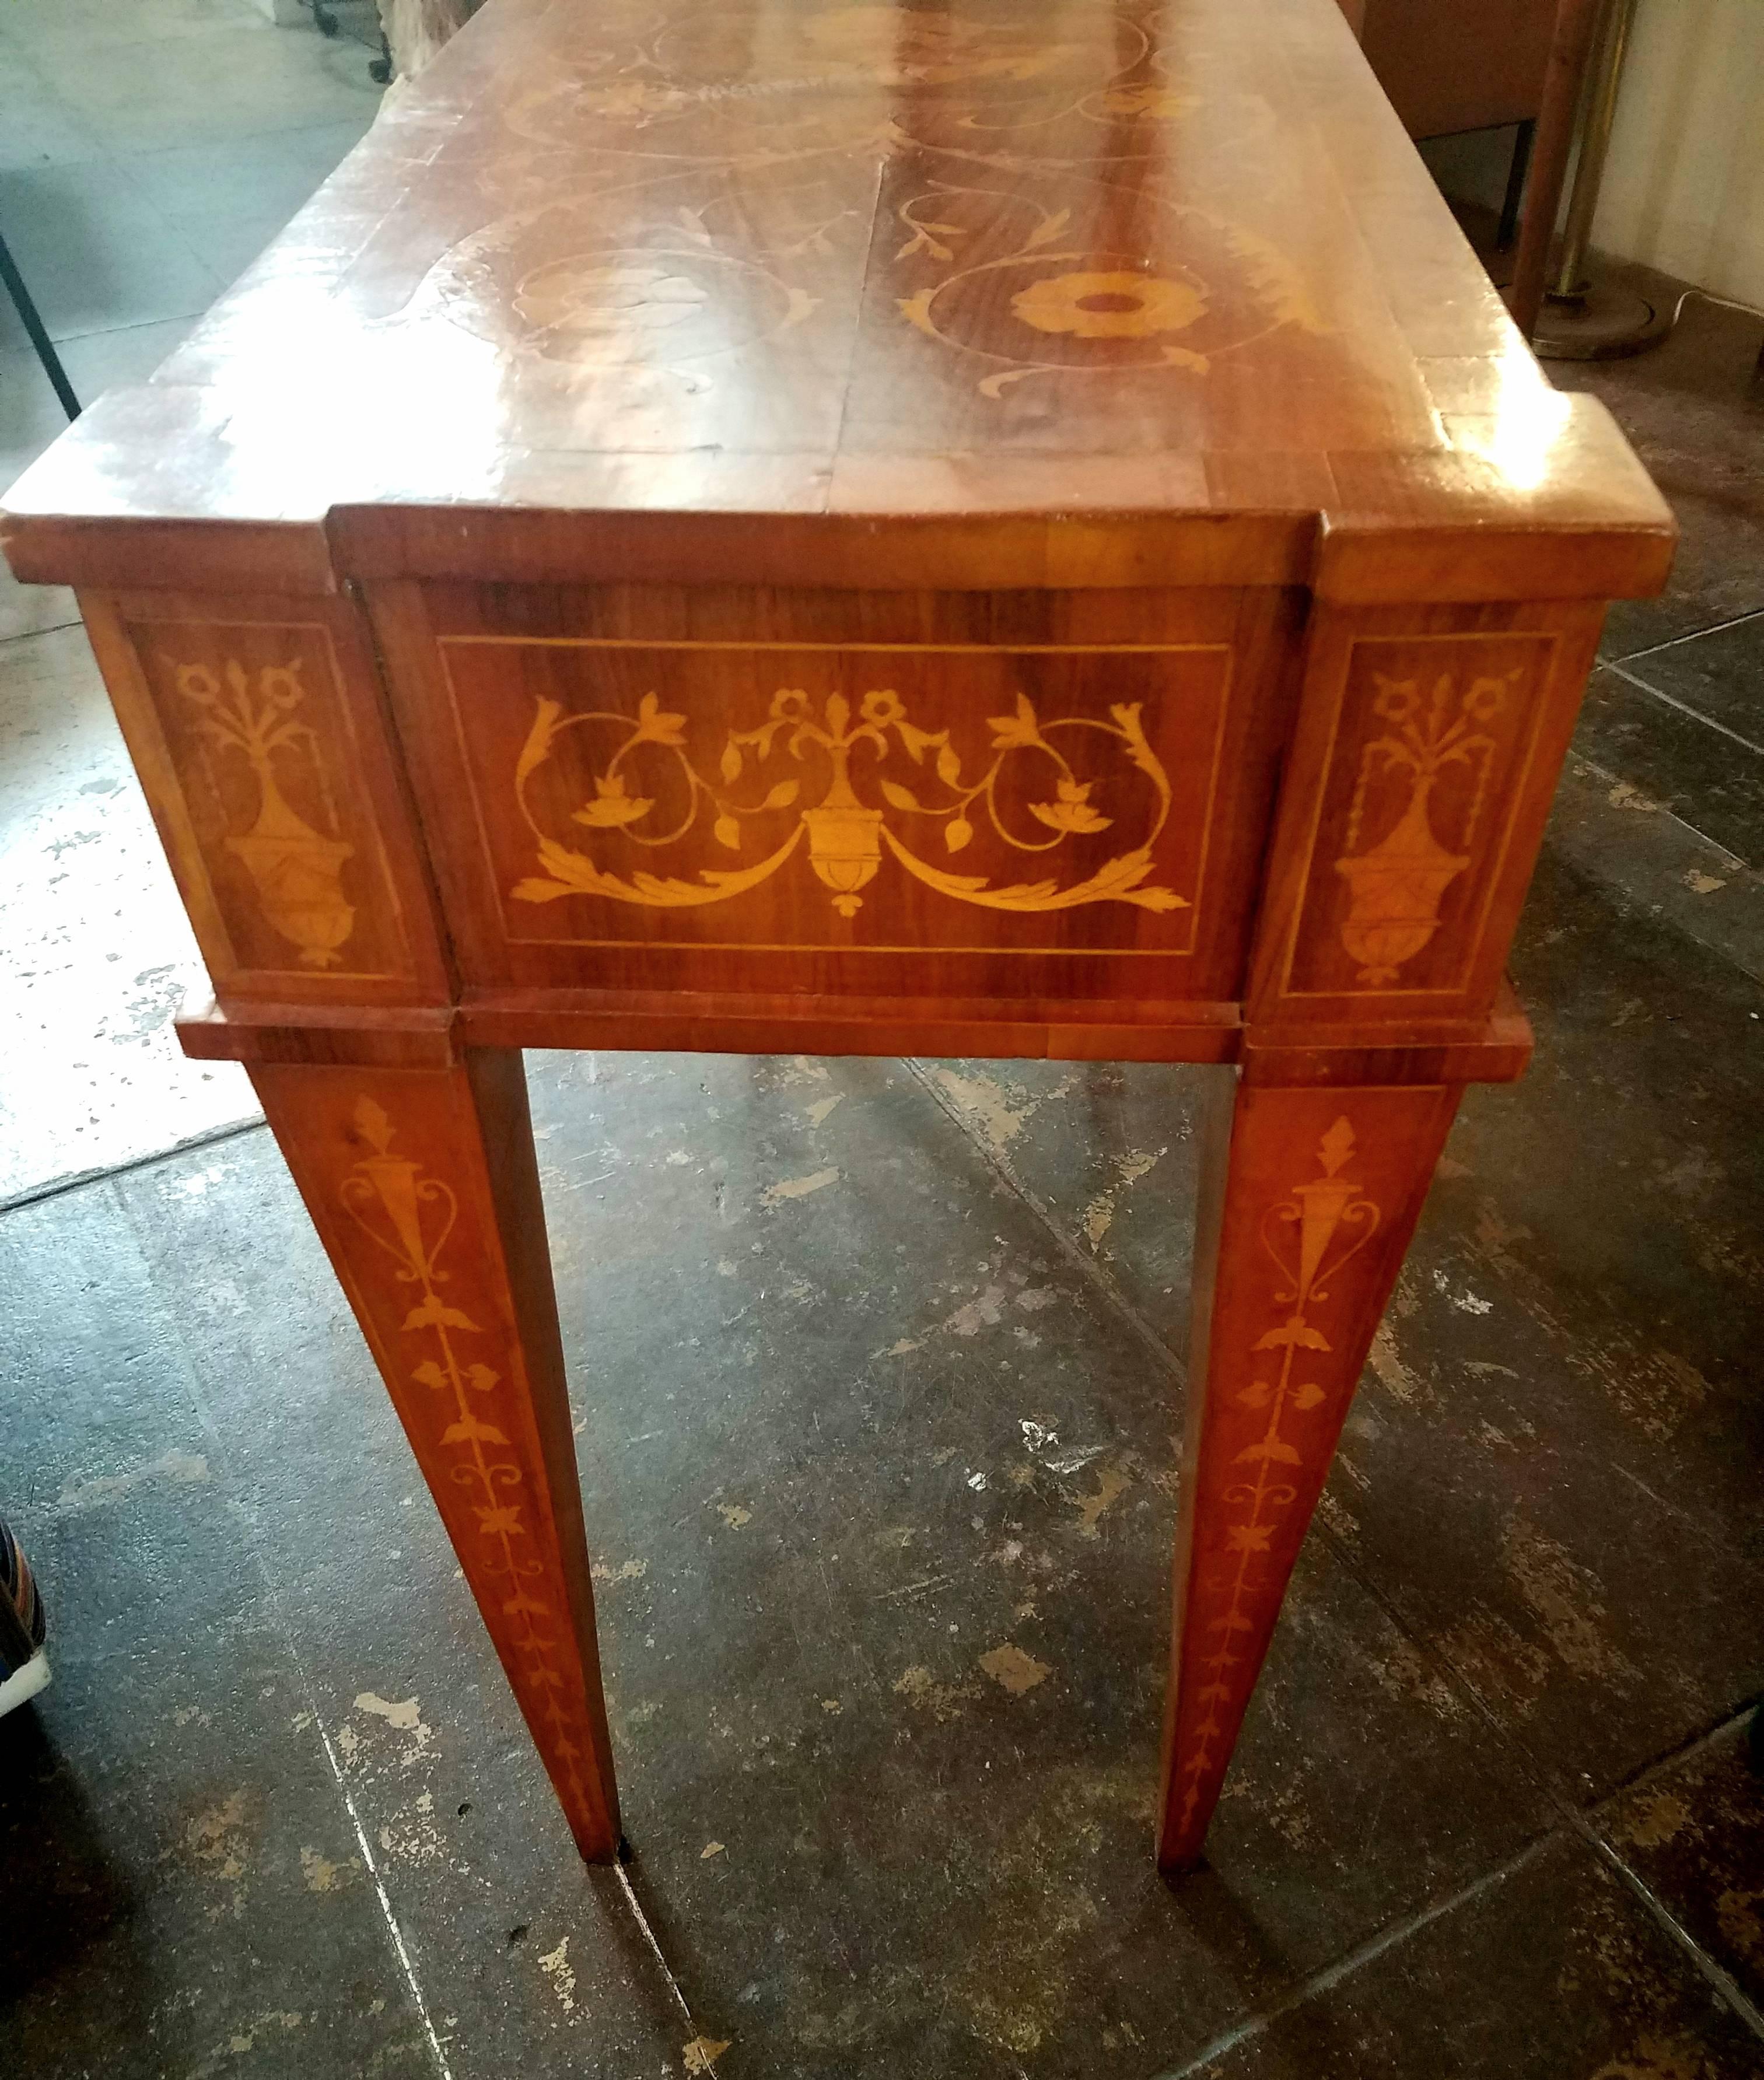 Italian Magolini design entry table. Patina and hand polished with shellac. Mahogany and maple veneer.
Also can work as side table or sofa table.